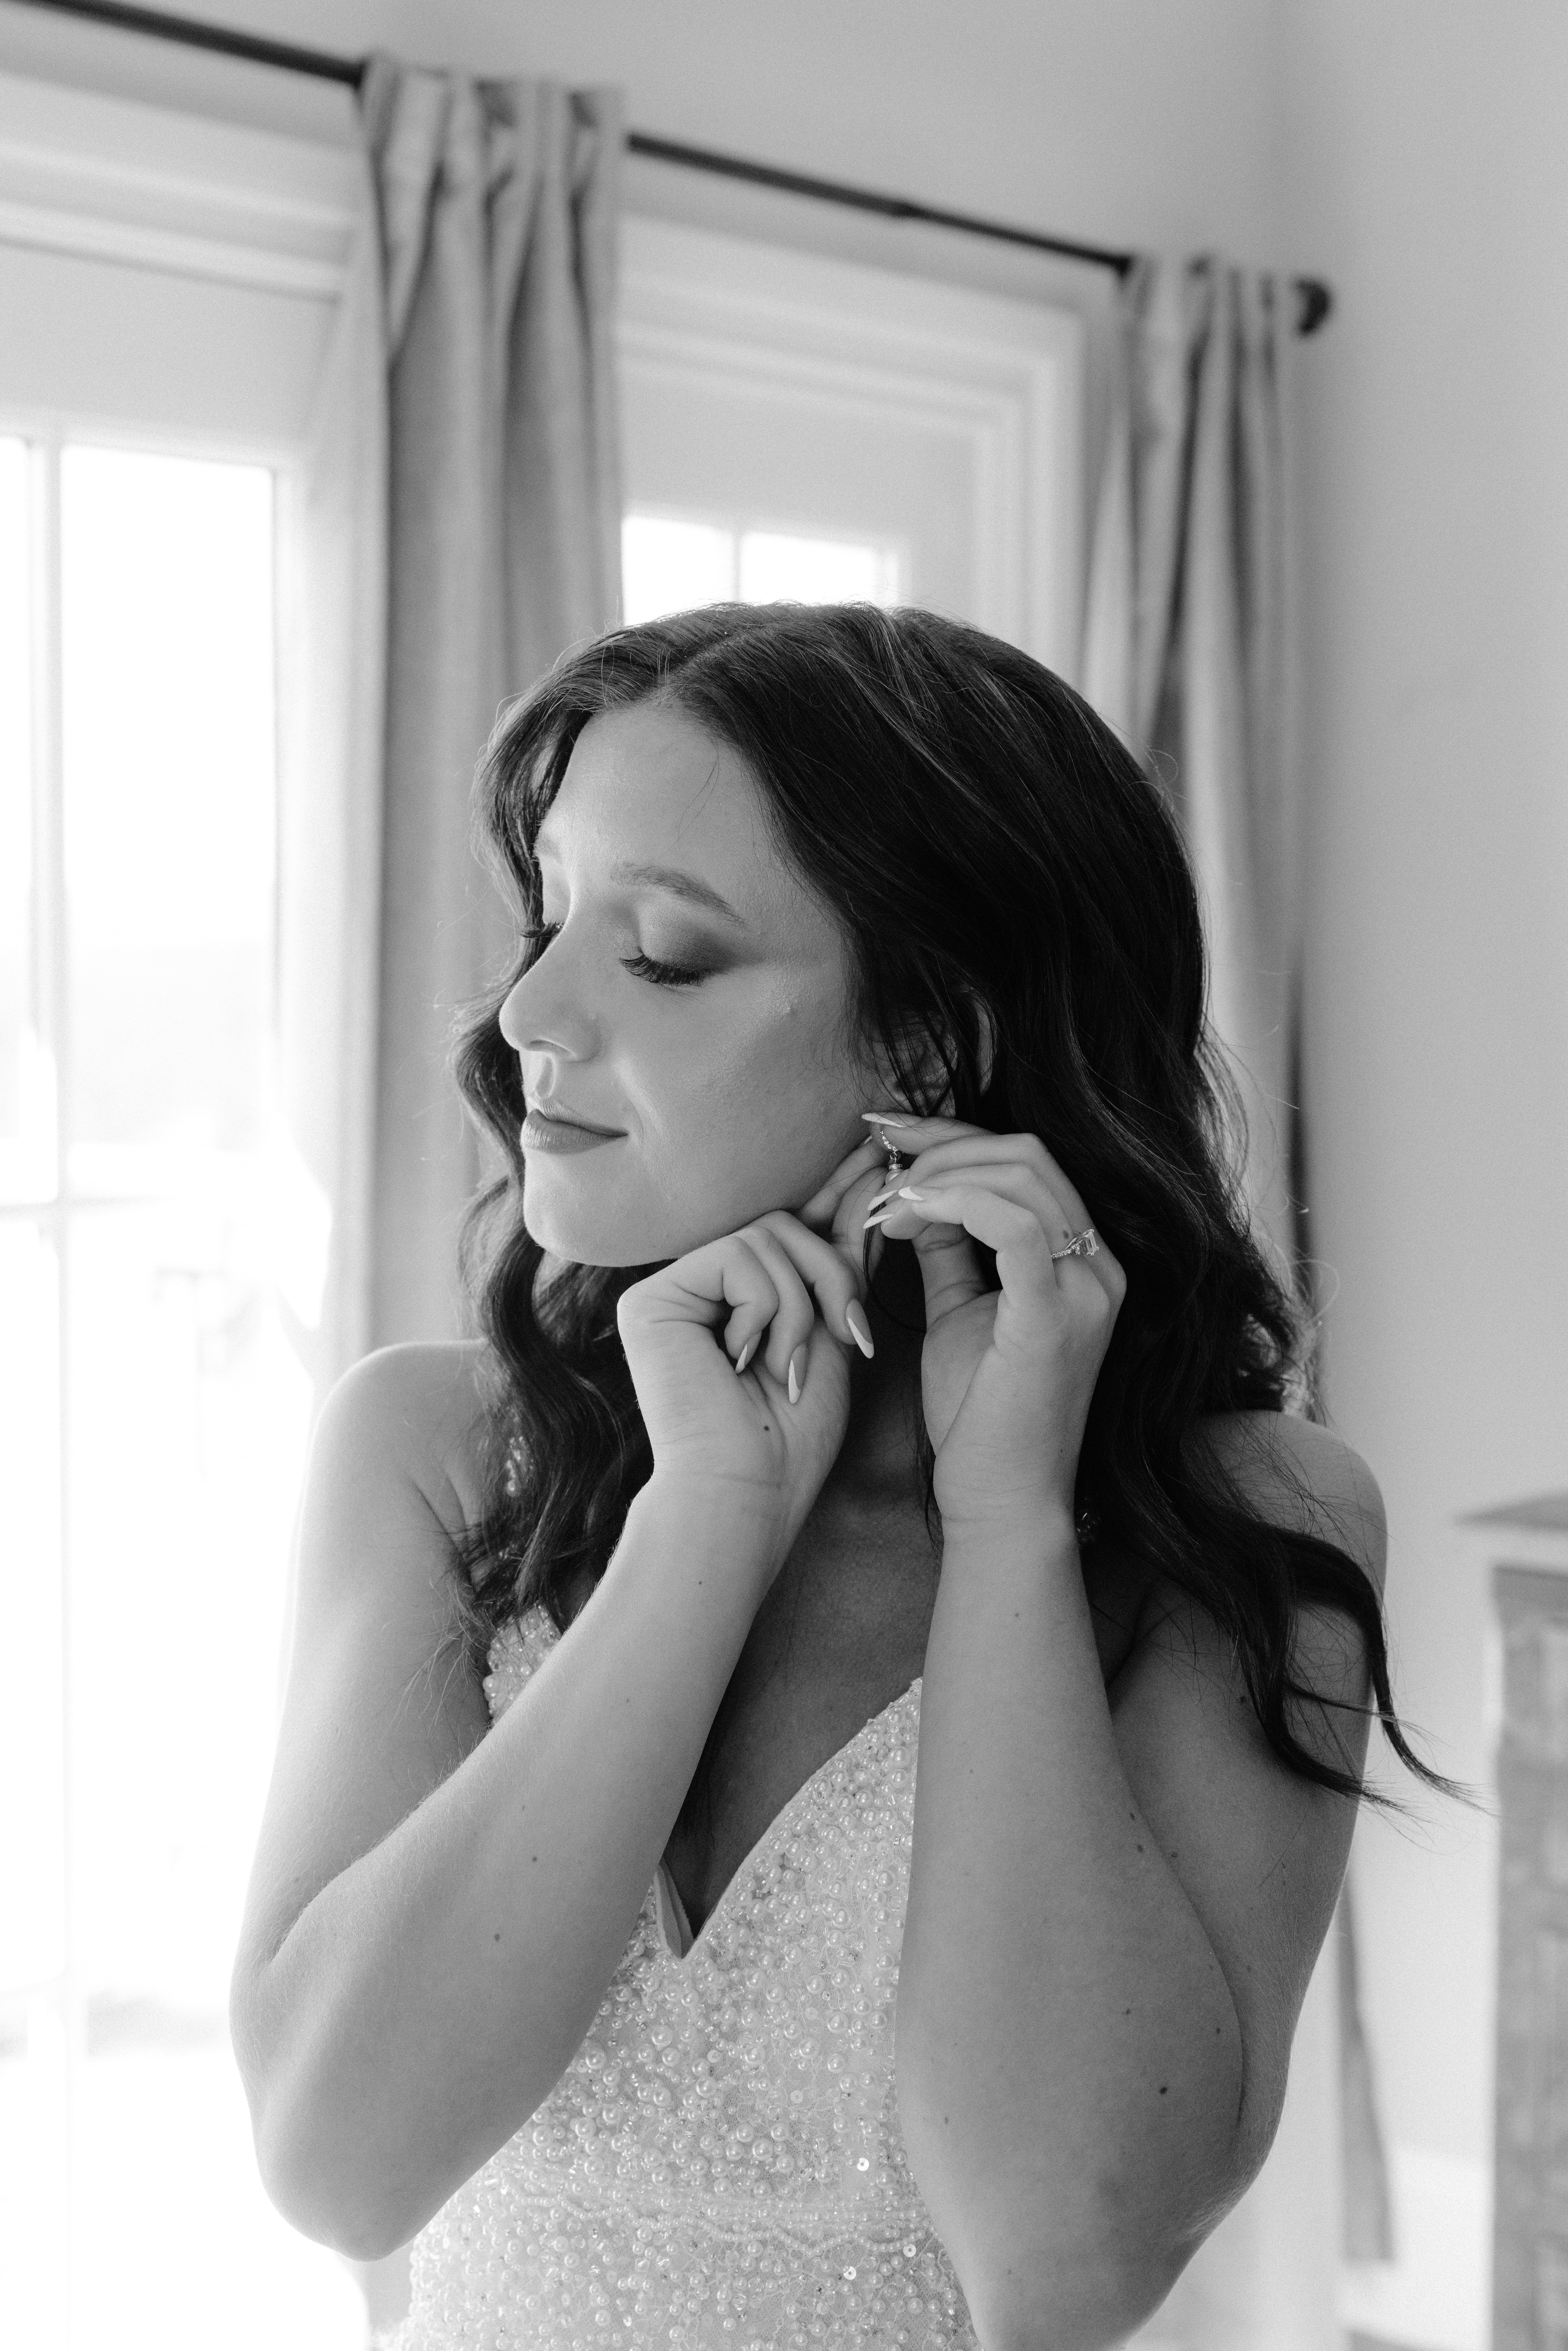 Bride getting ready, brides details, bridal portraits, bride putting on her jewelry. Tatyana Zadorin photography, branson mo wedding photographer